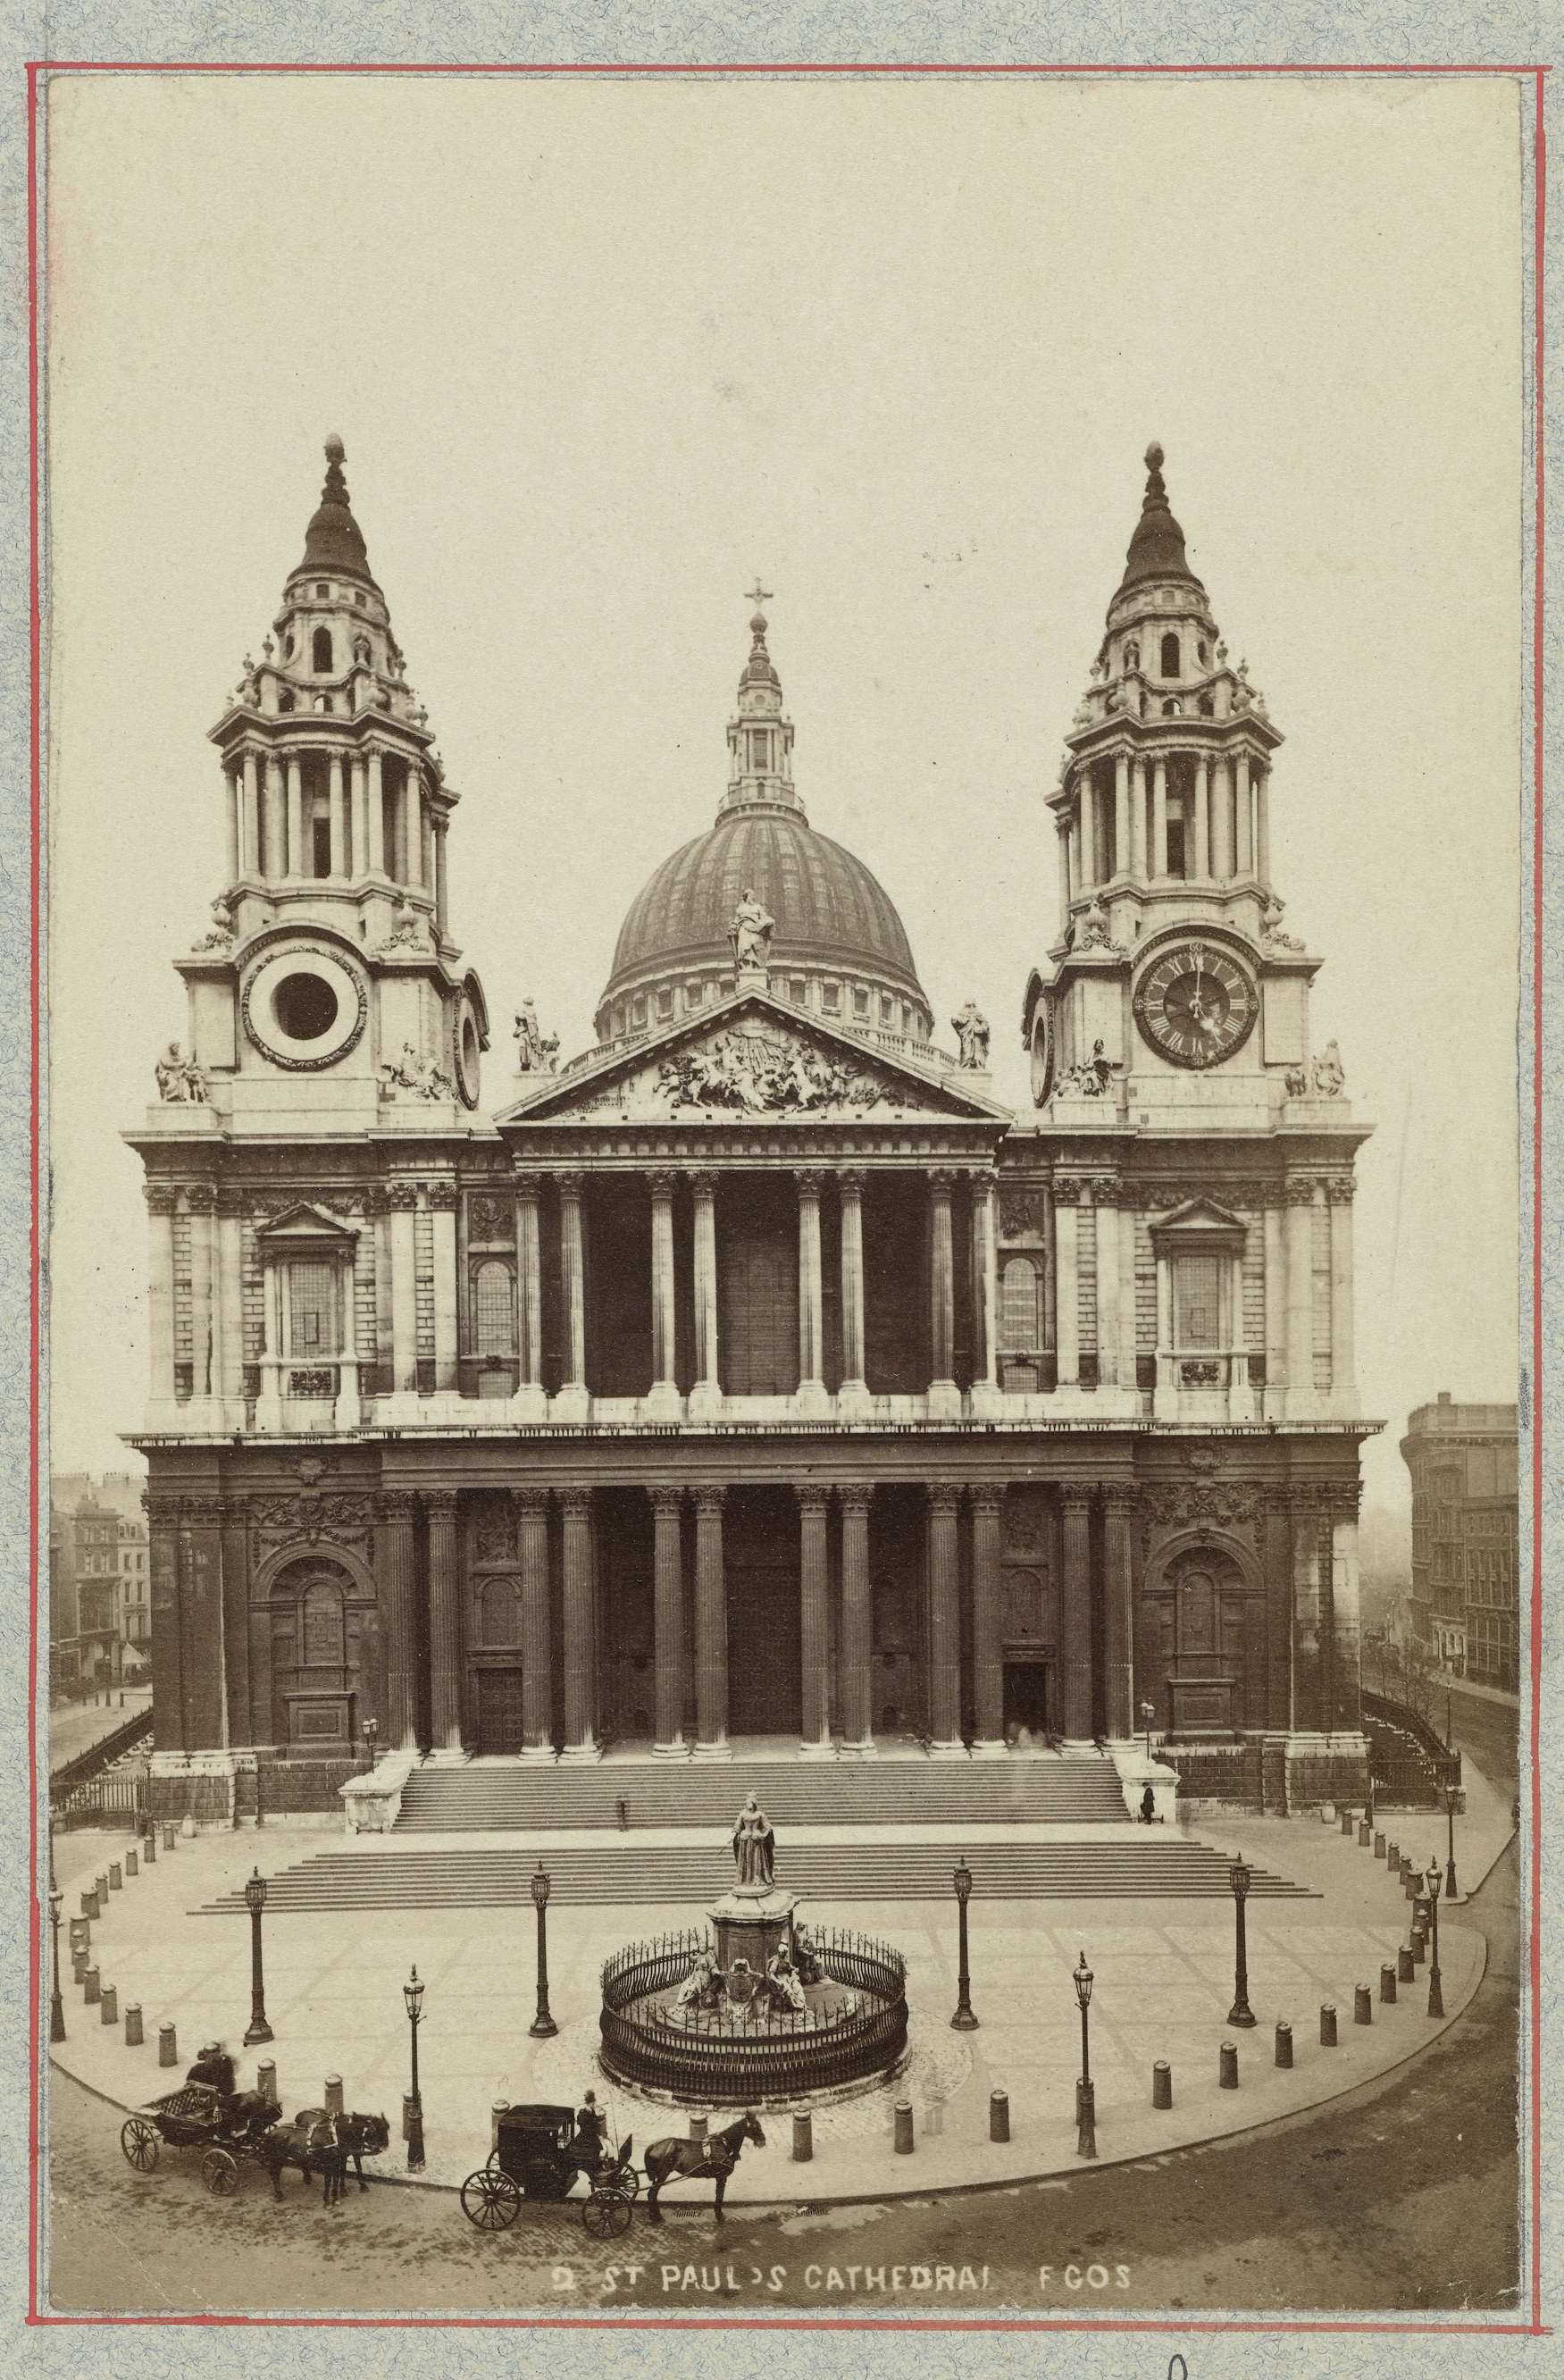 St. Paul's Cathedral, Londen, St Paul's Cathedral